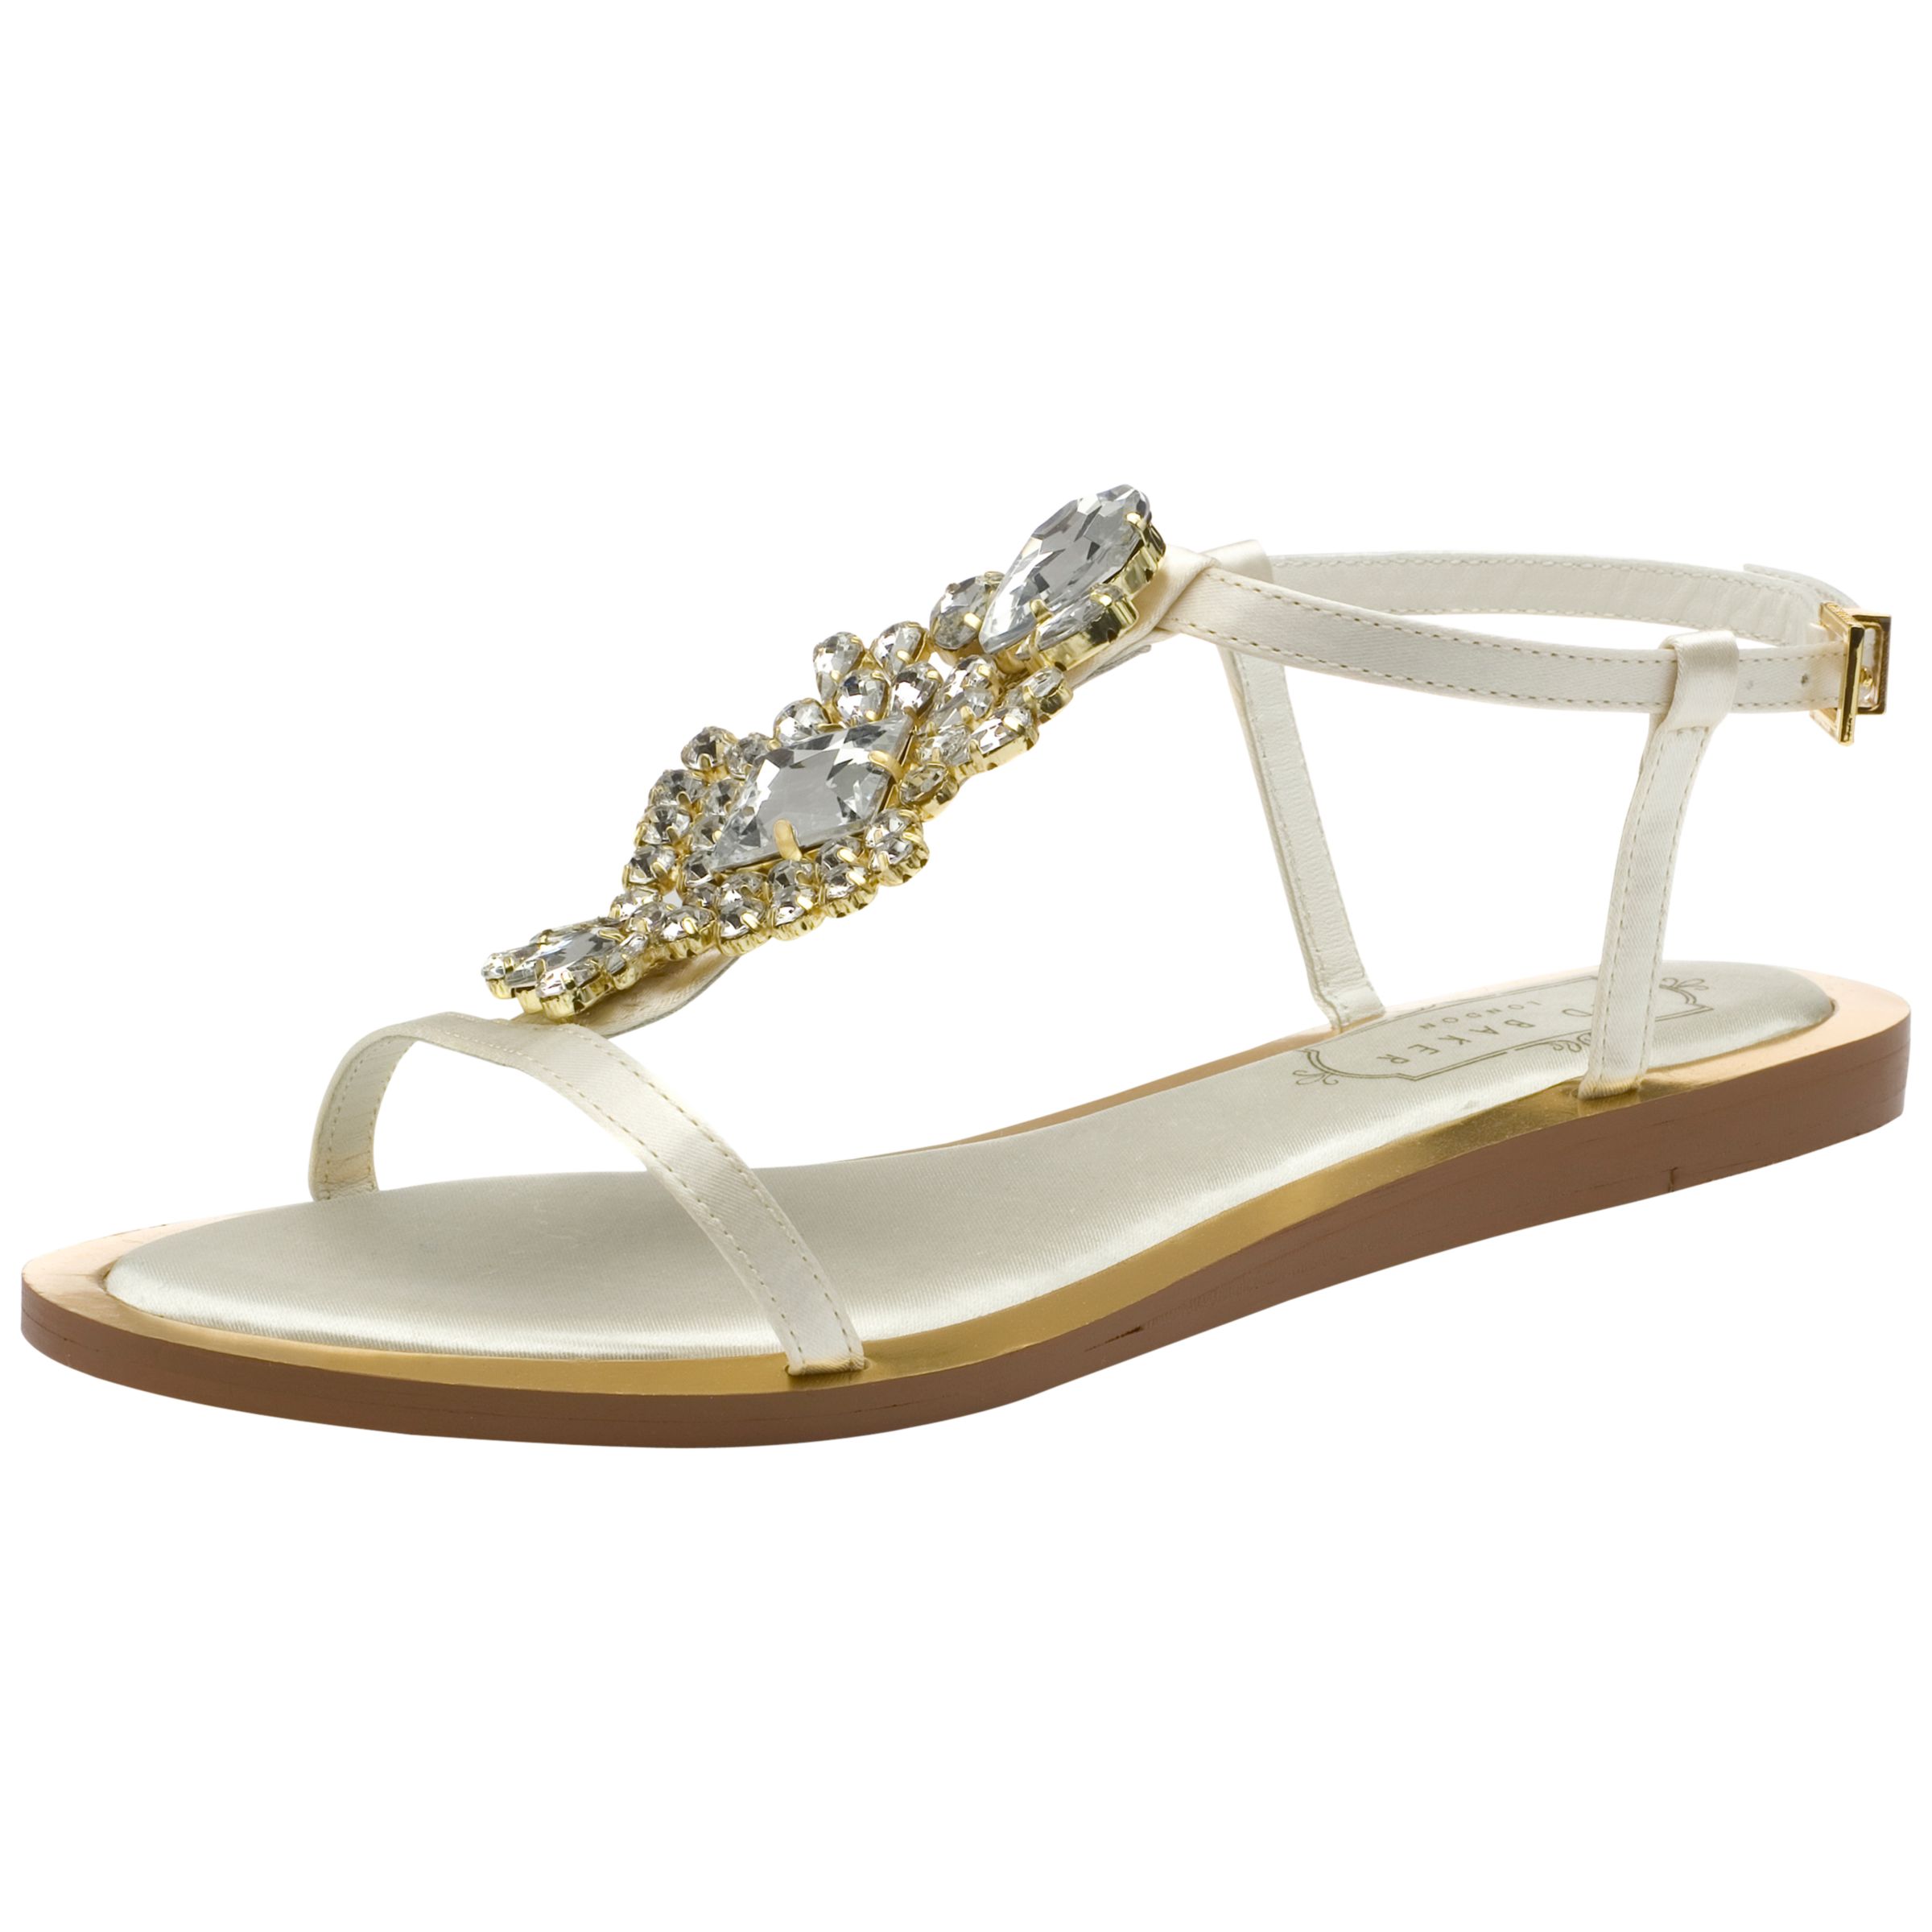 Ted Baker Tie the Knot Roseupe Jewelled Sandals, Cream